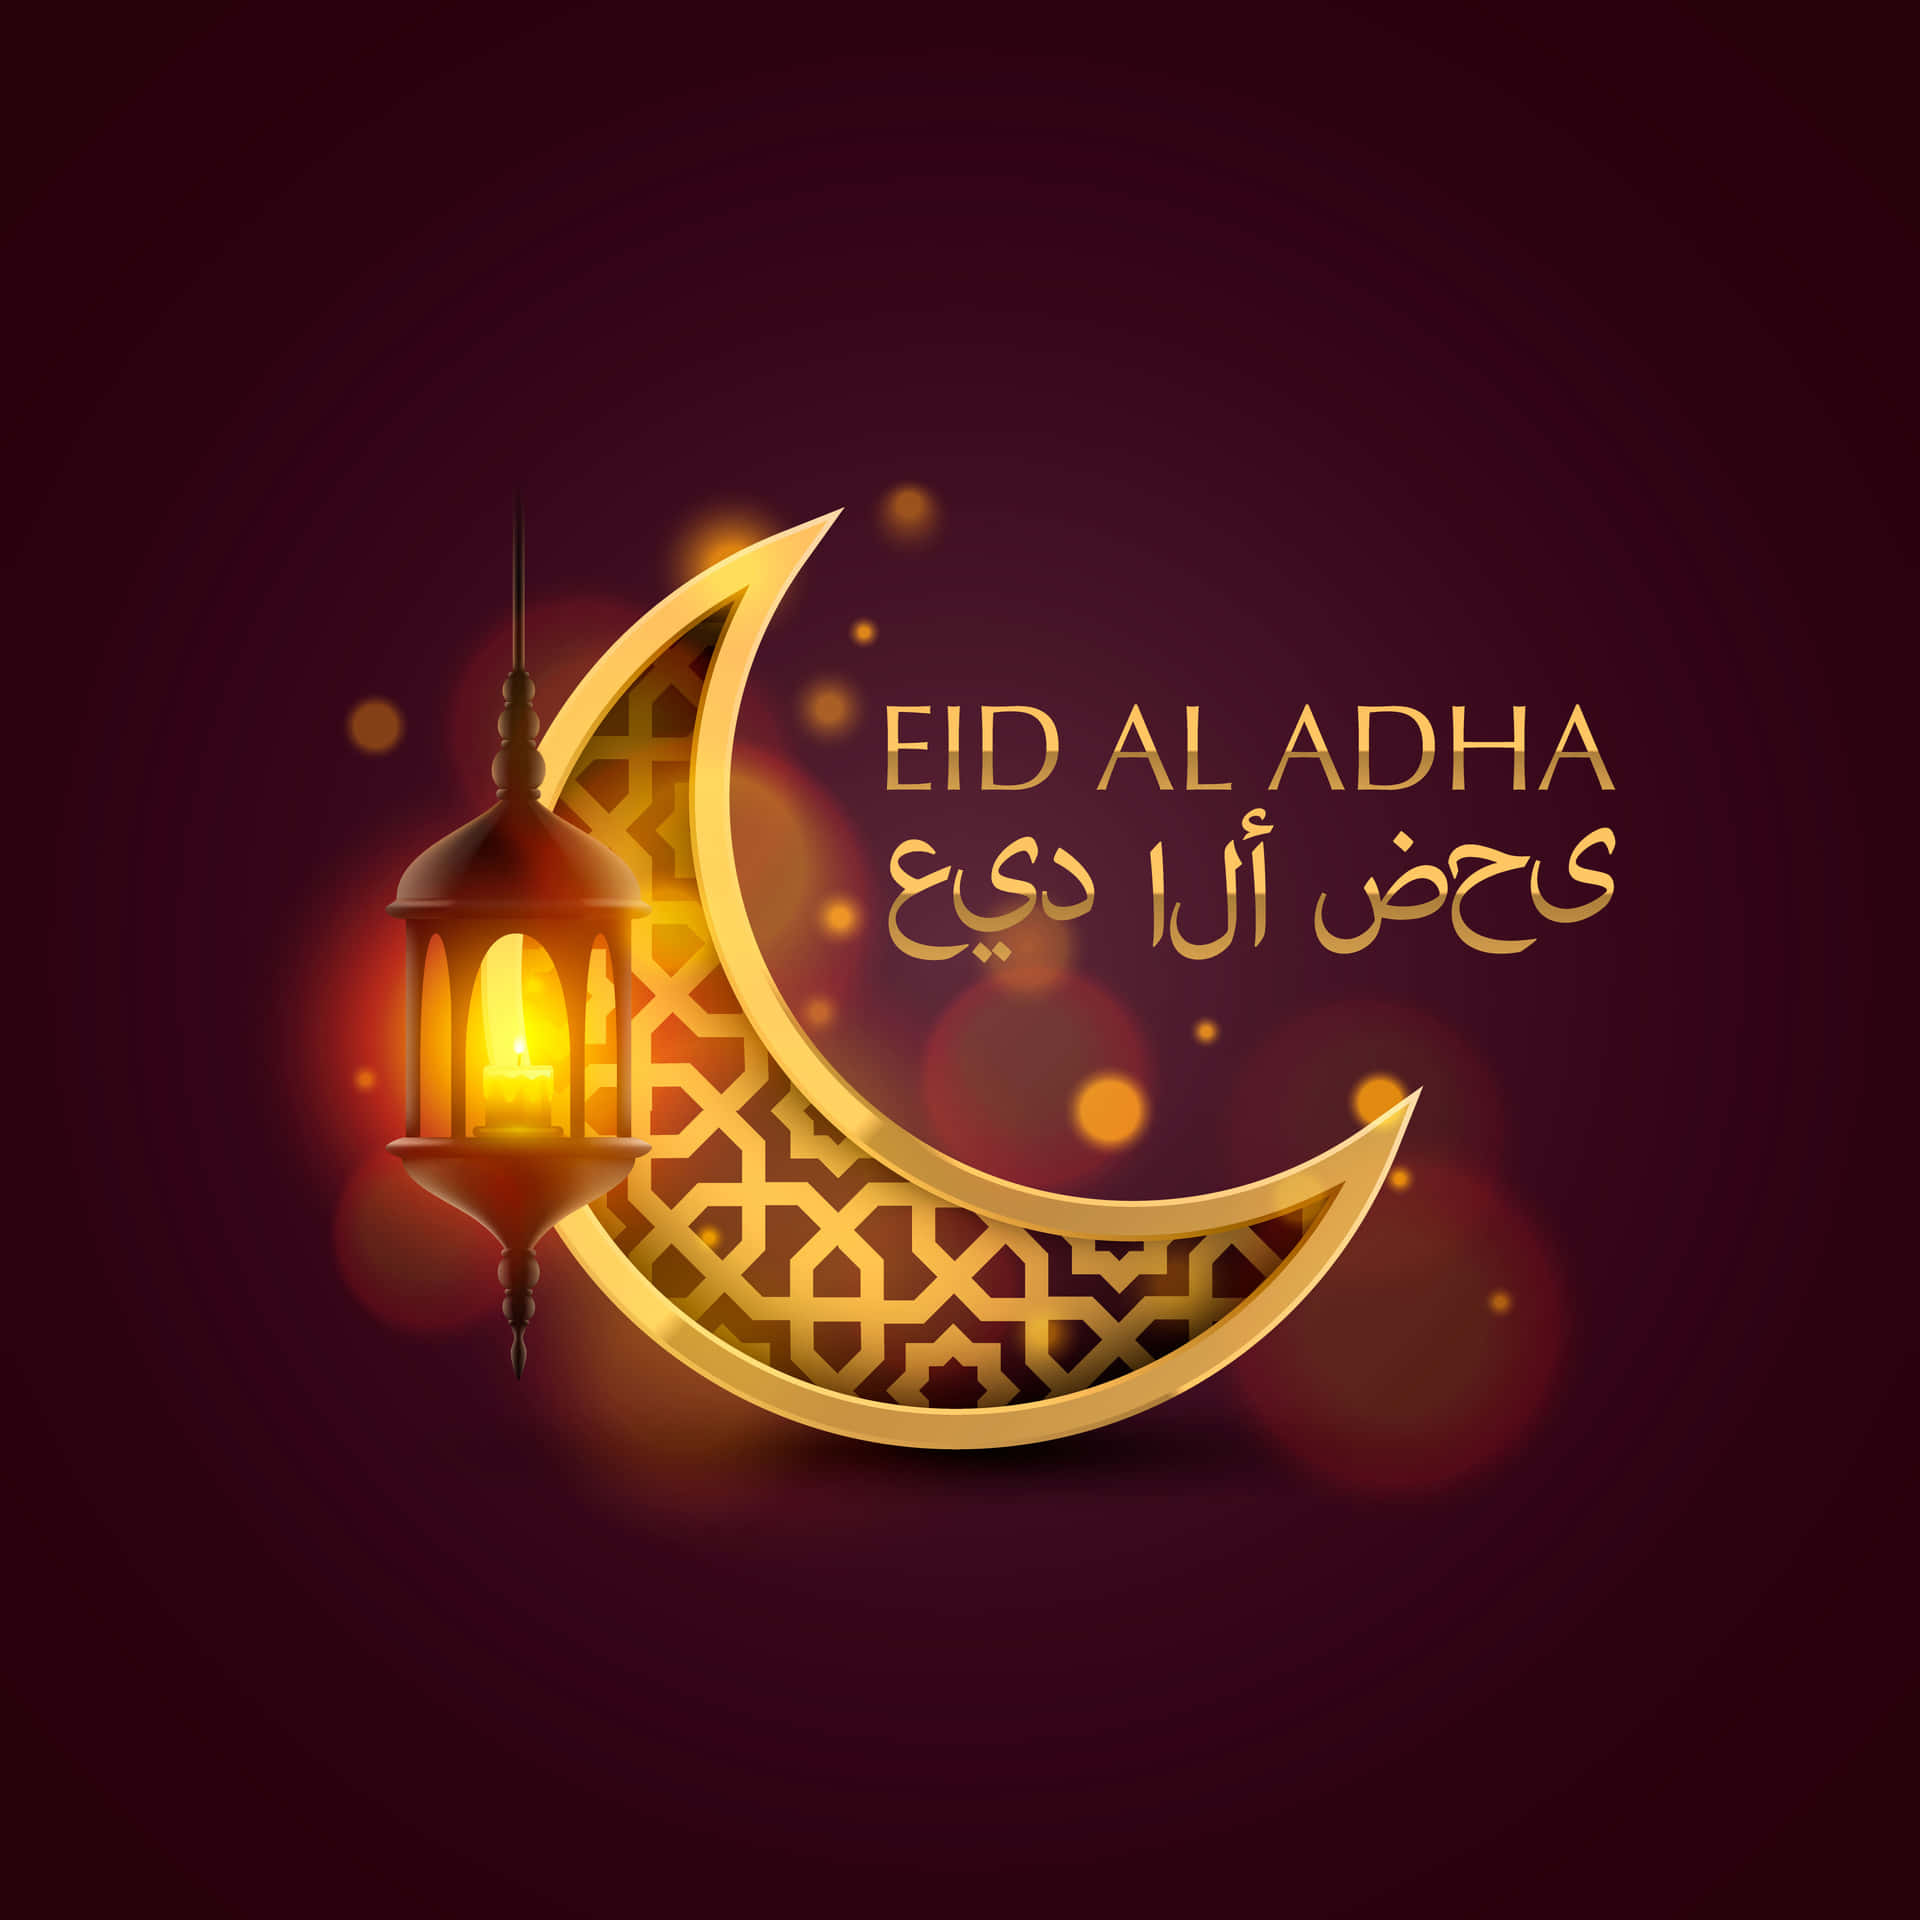 Wishing a blessed Eid to you and yours